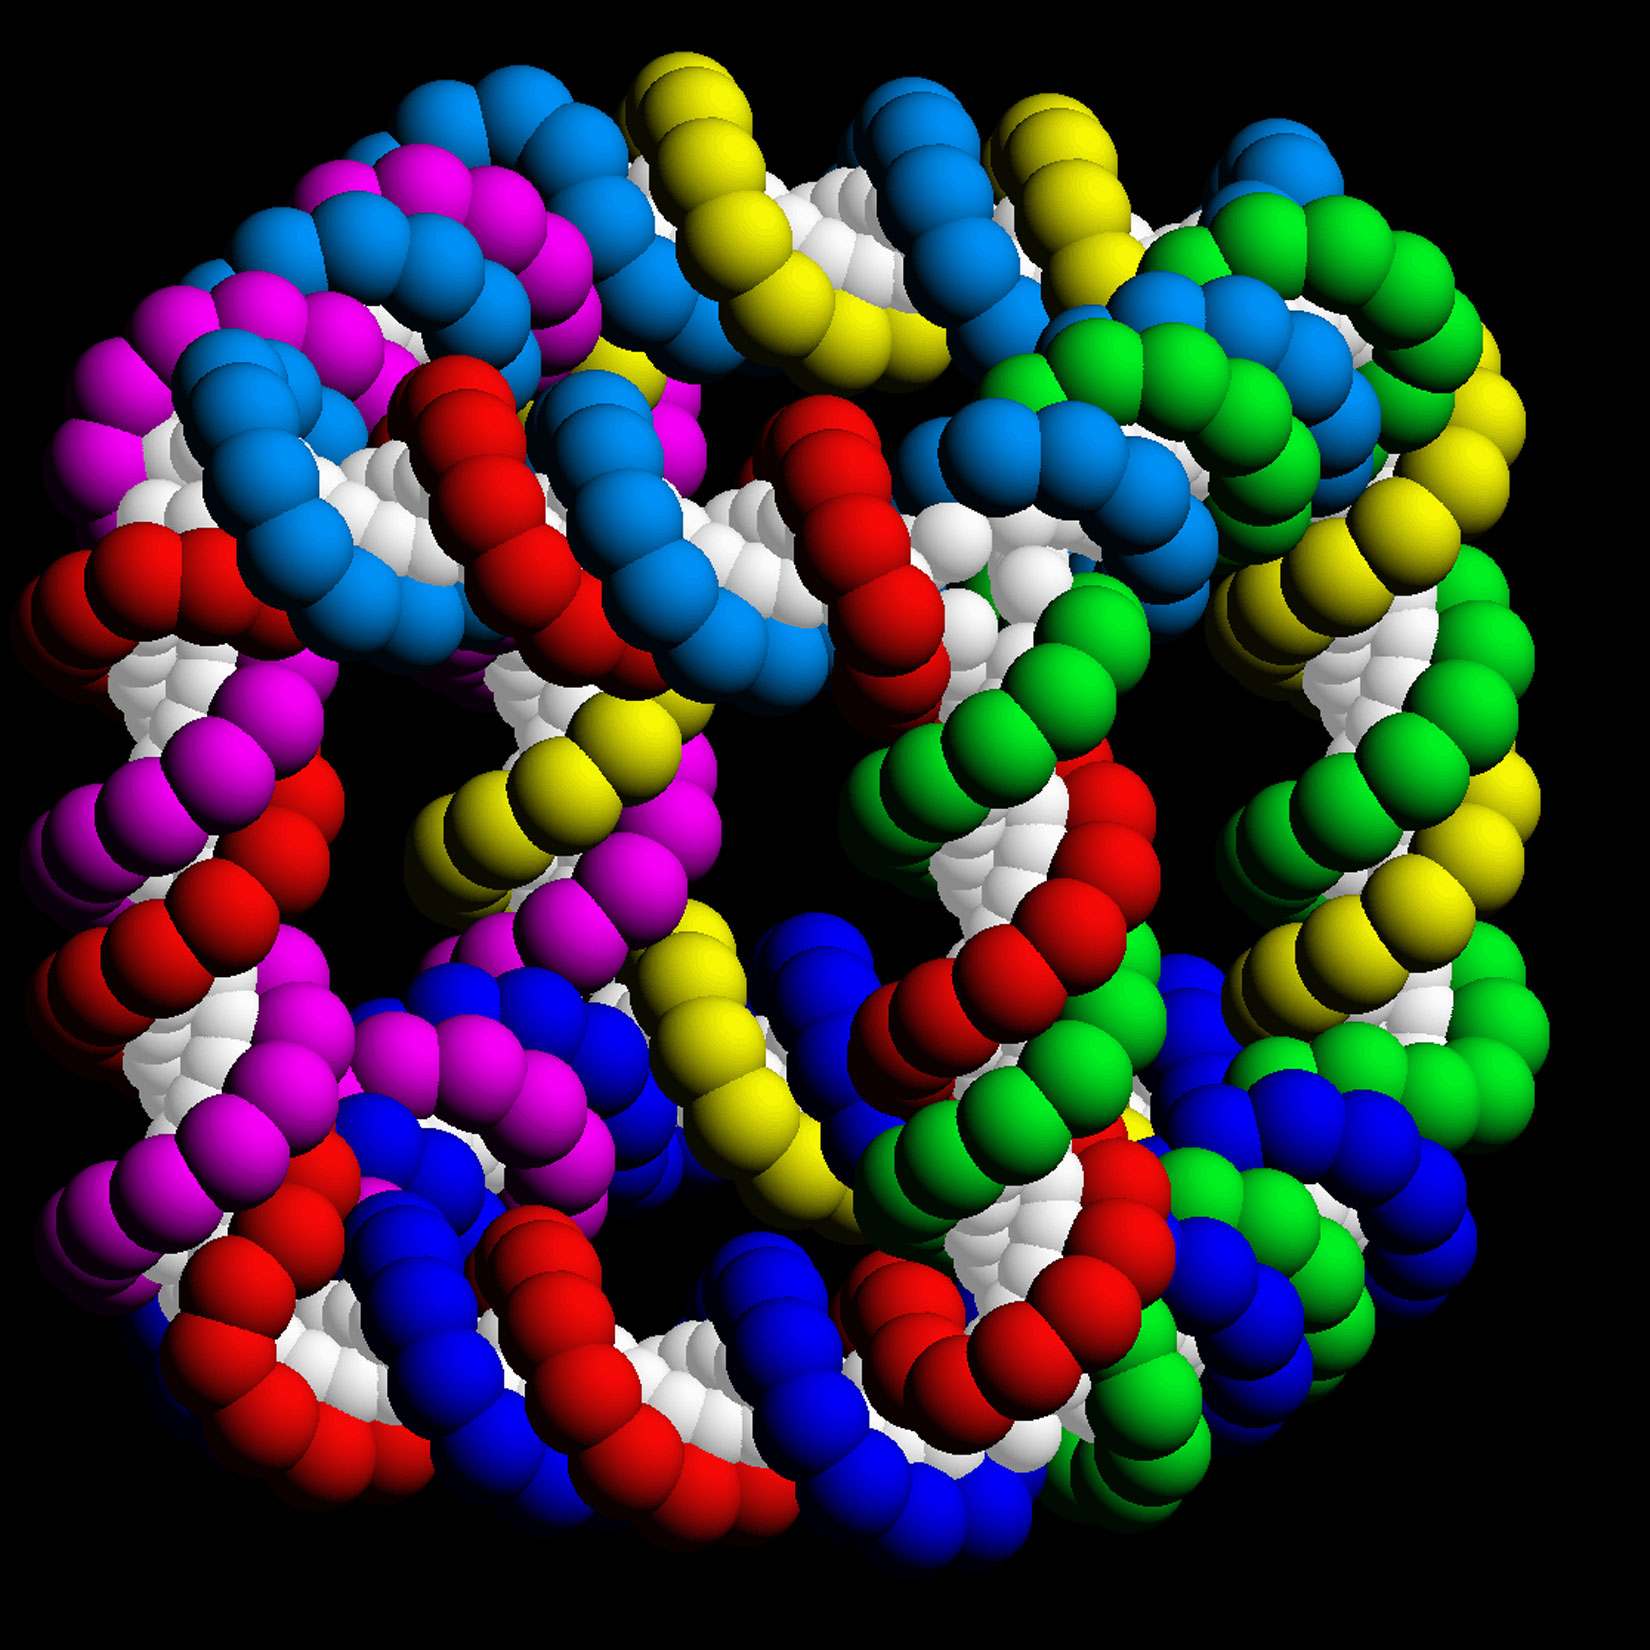 representation of a DNA cube shows that it contains six different cyclic strands